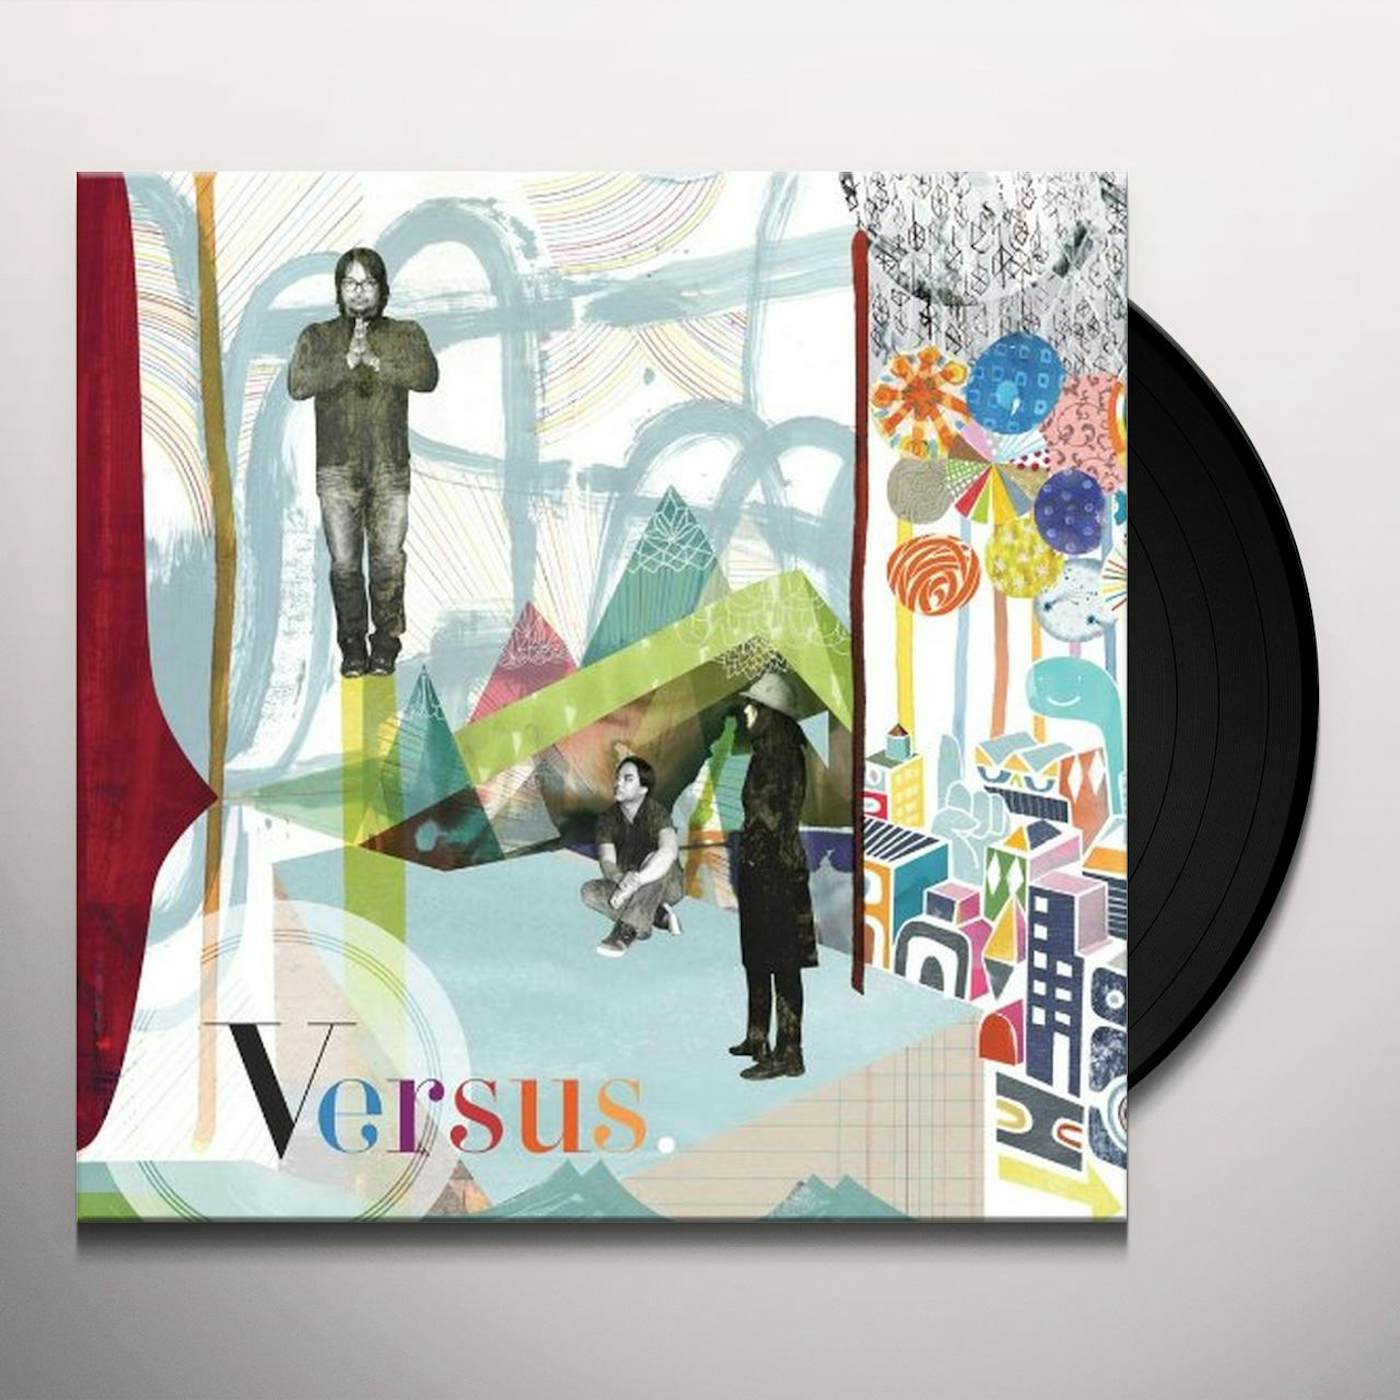 Versus On The Ones And Threes Vinyl Record